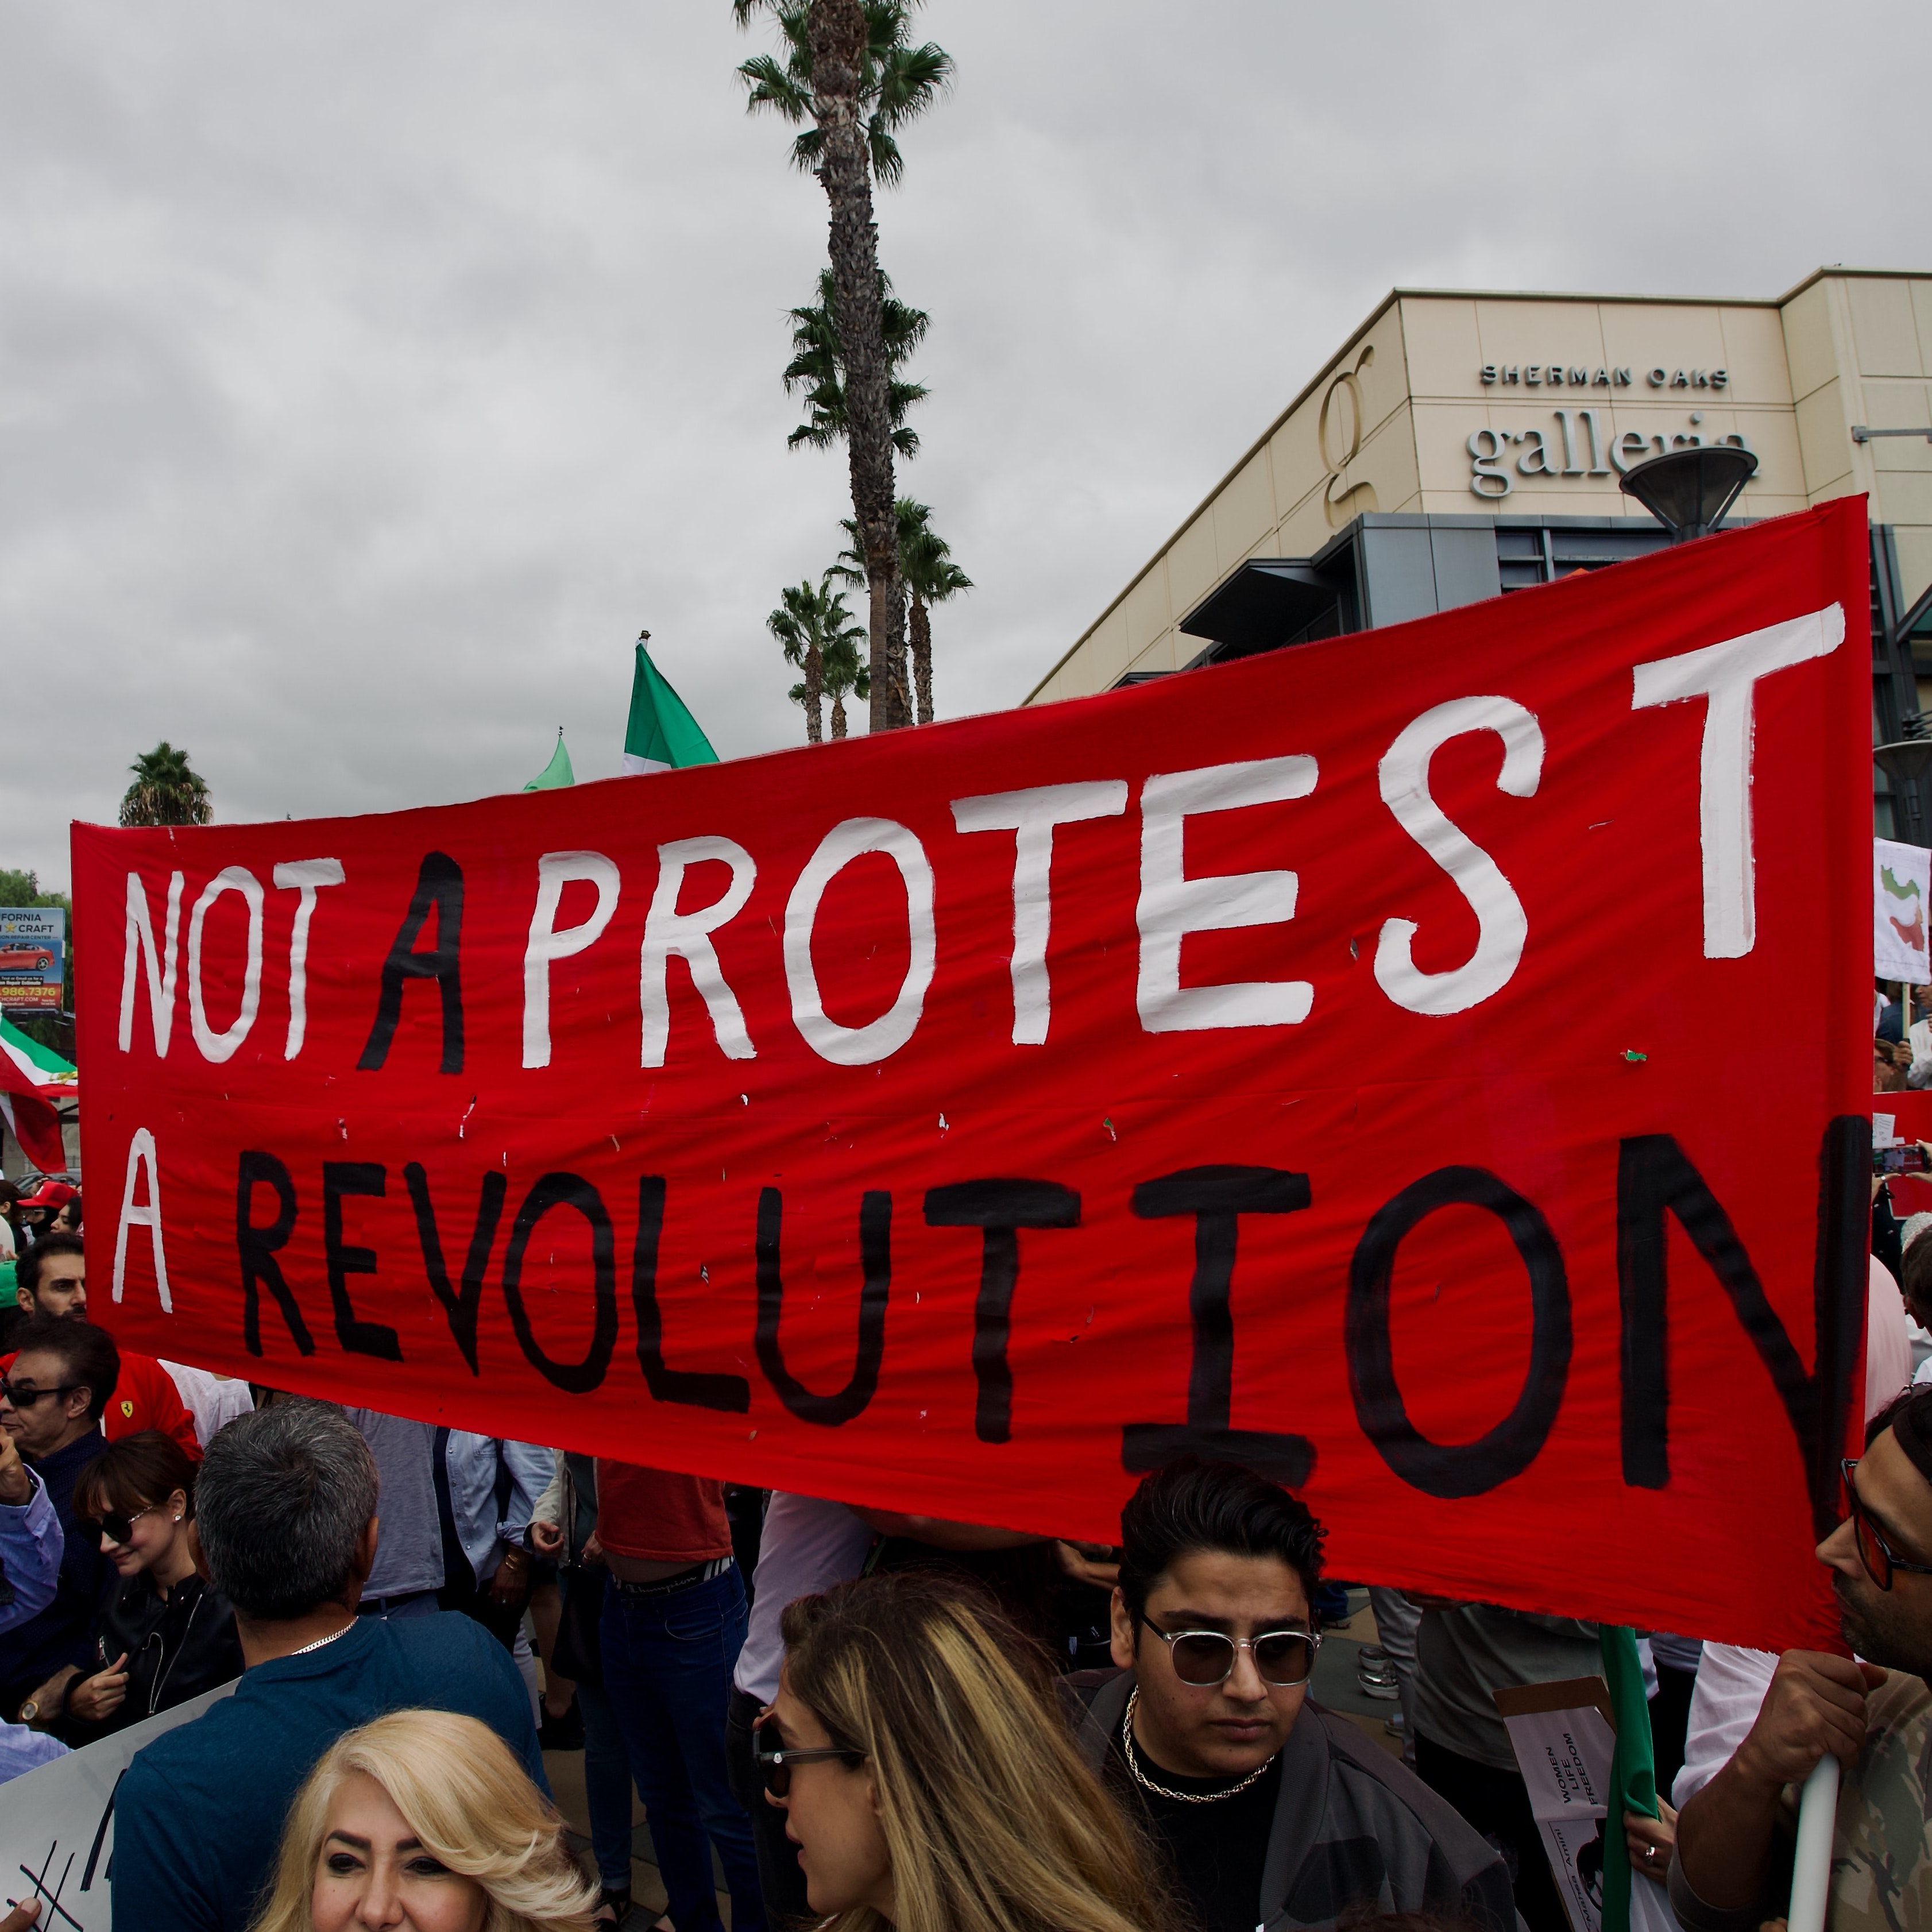 Photograph by Craig Melville, courtesy of Unsplash. Iran protest October 15, 2022 - Sherman Oaks, CA. Large red banner that says 'Not A Protest, A Revolution.